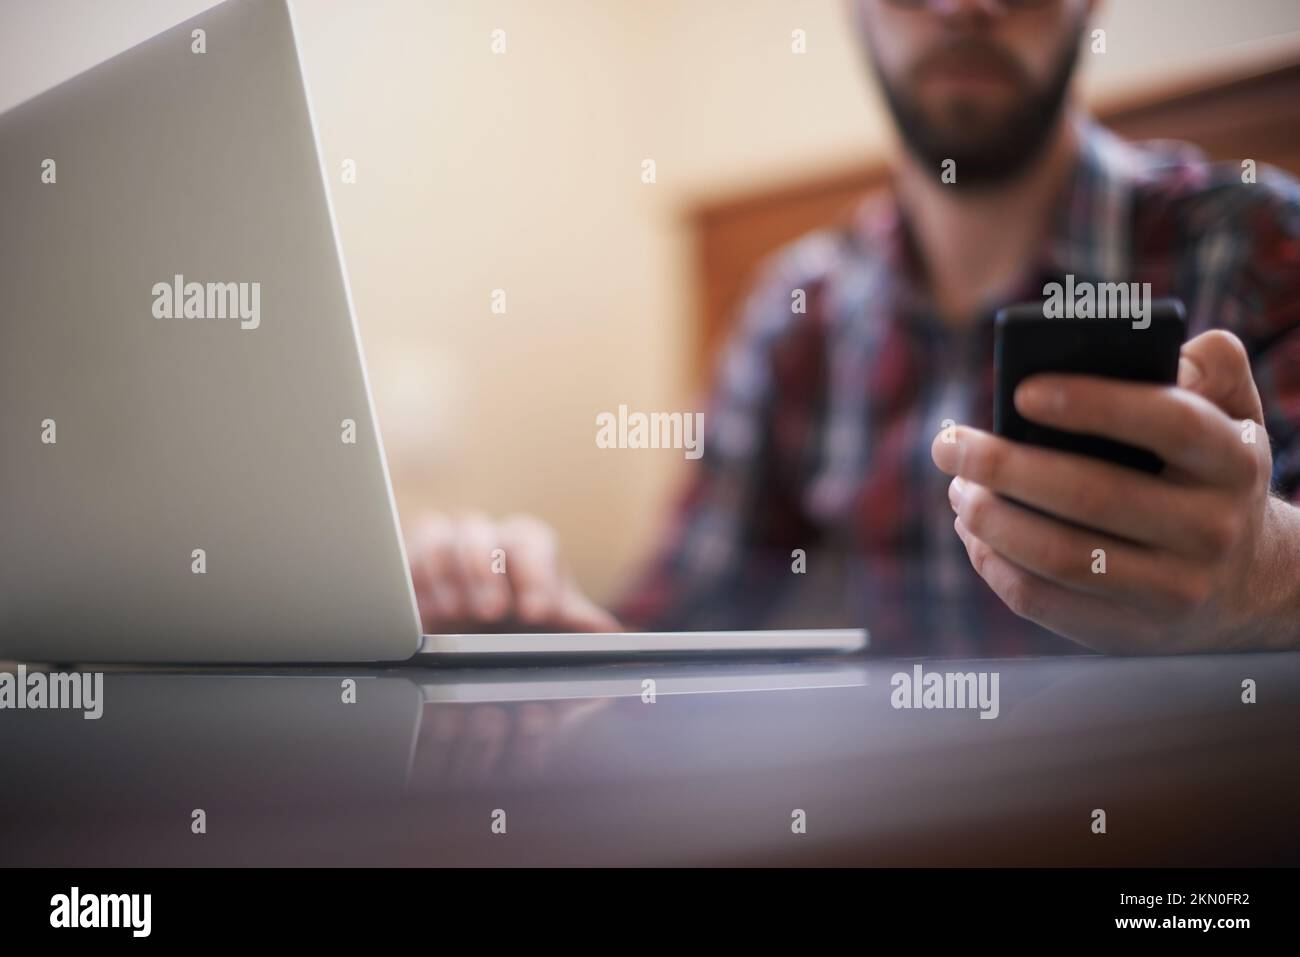 Hes connected in more ways than one. a man using a laptop and a cellphone. Stock Photo